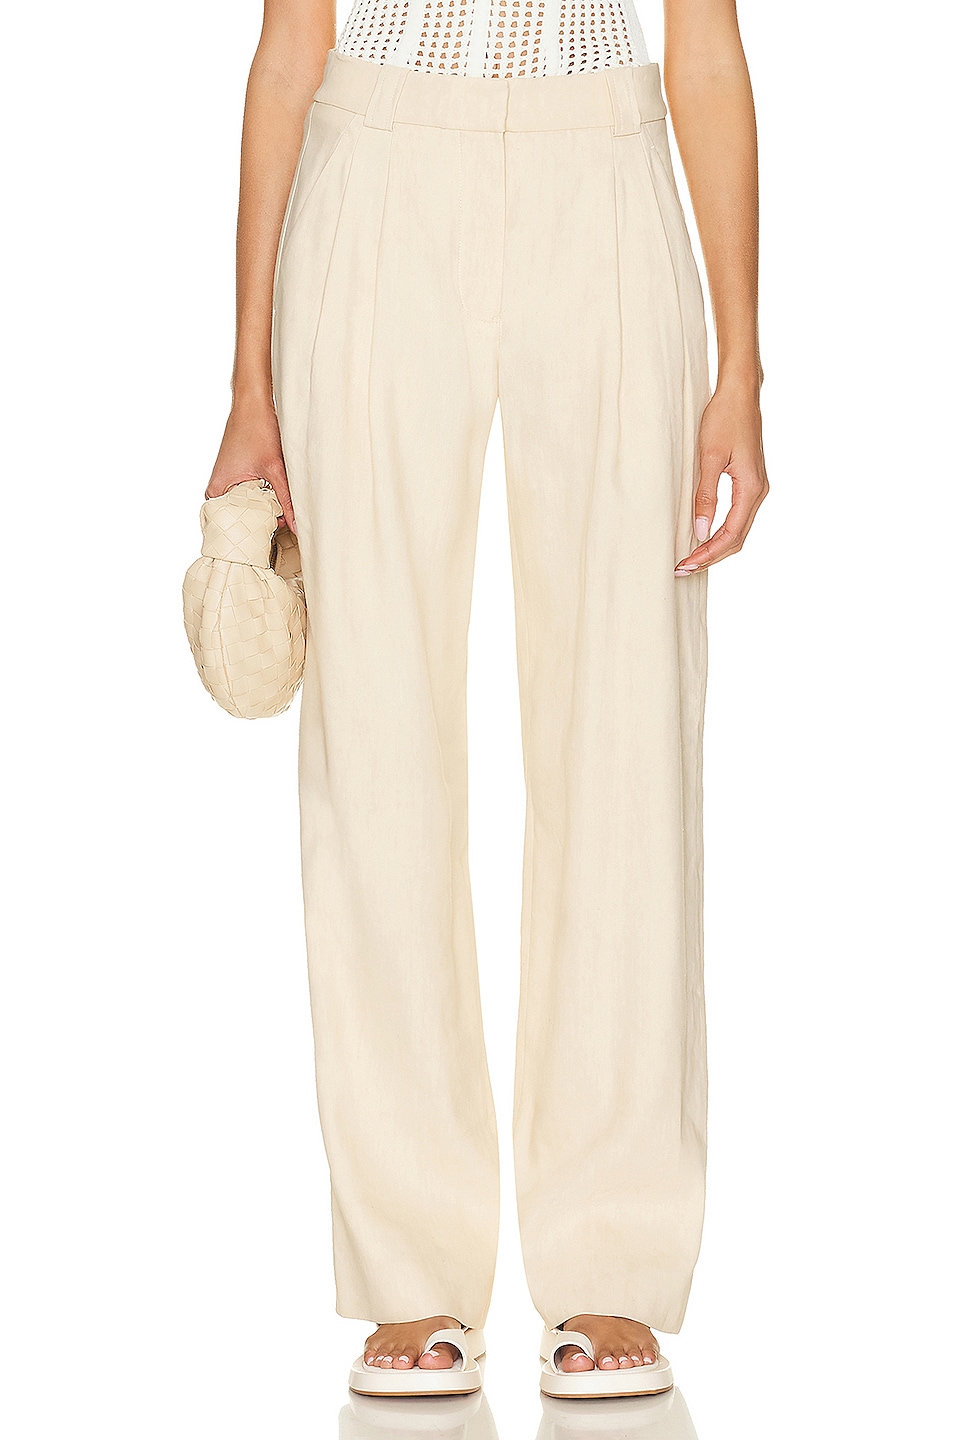 Image 1 of A.L.C. Fynn Pant in Barely Beige